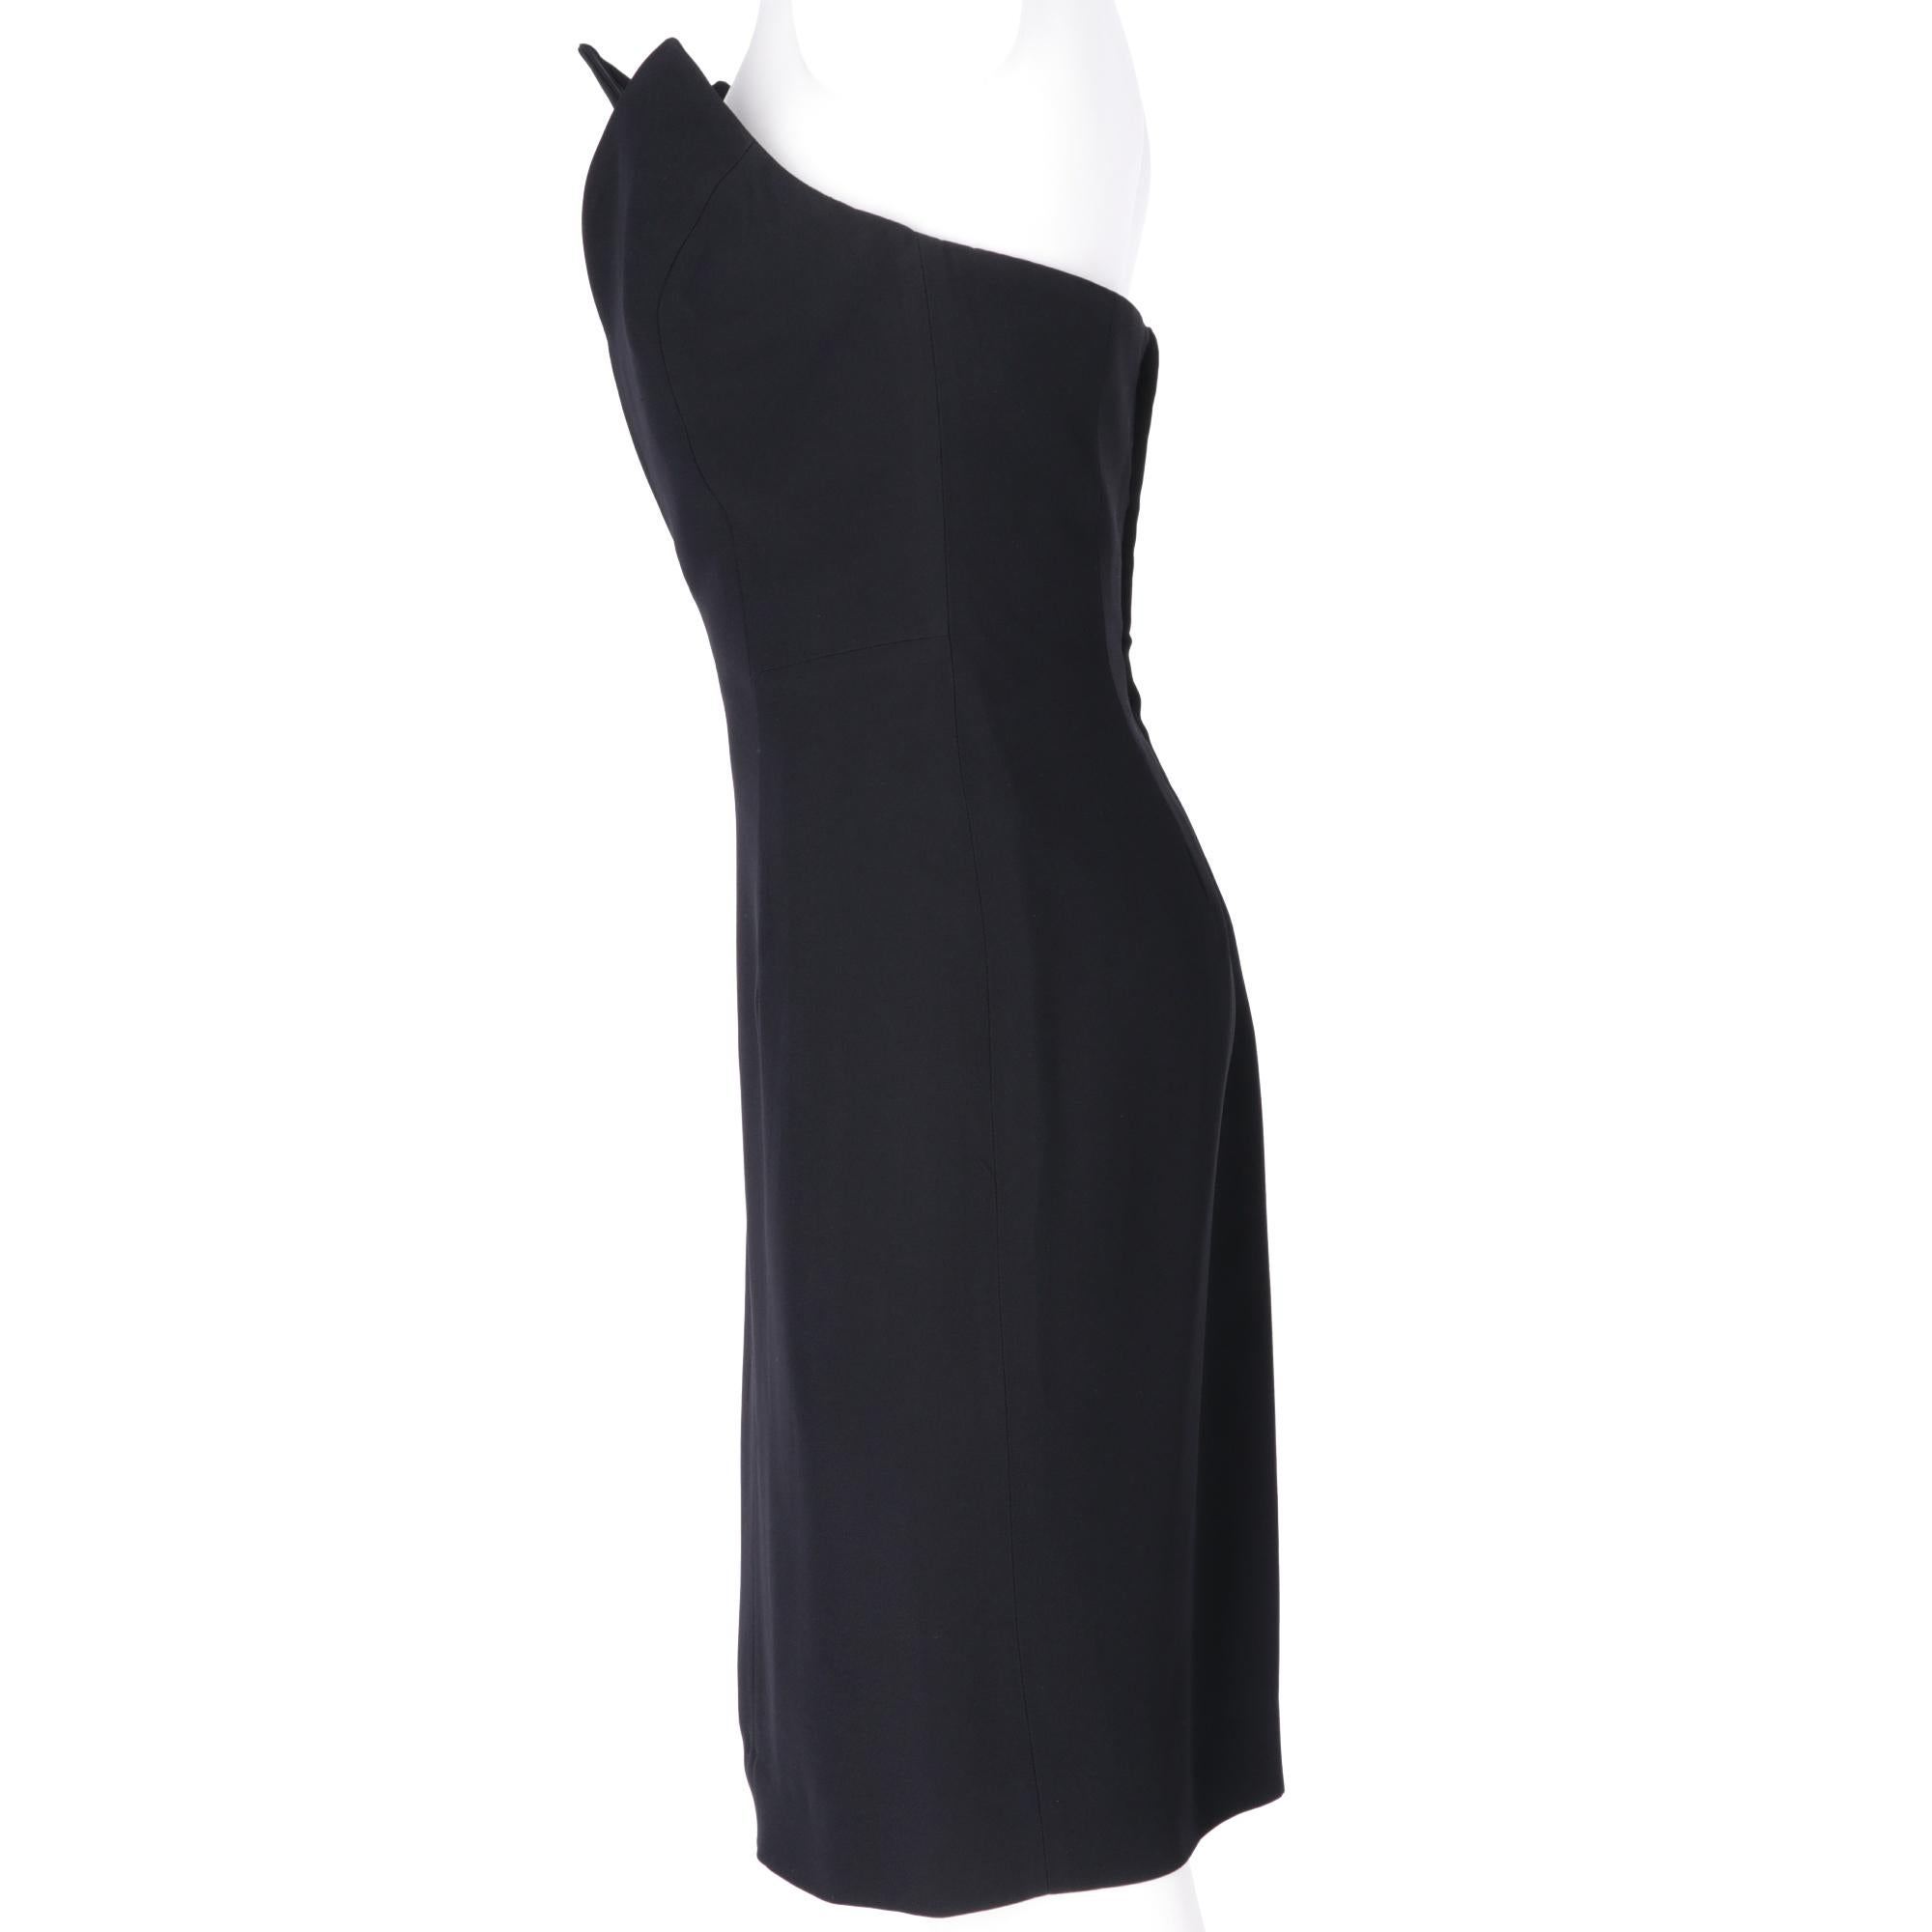 Elegand and refined Alberta Ferretti black evening sleeveless sheath dress, with a floral-shaped top and back zip fastening. Lined in black fabric. Slim fit.

SIZE: 46 IT

Made in Italy

Linear measures

Height: 85 cm 
Bust: 43 cm
Waist: 35 cm
